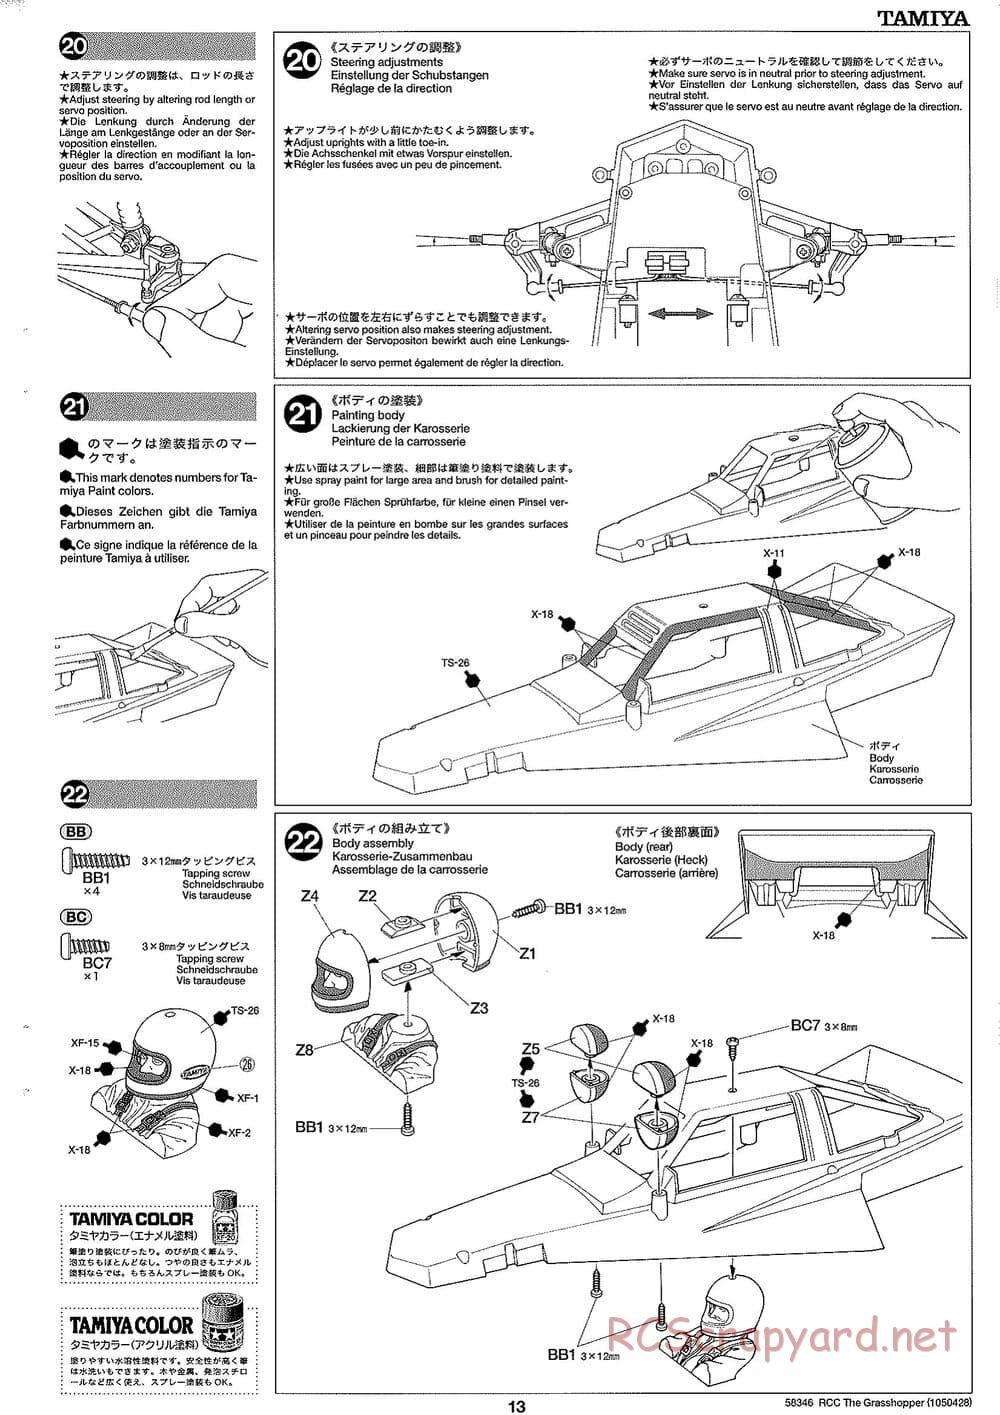 Tamiya - The Grasshopper (2005) - GH Chassis - Manual - Page 13